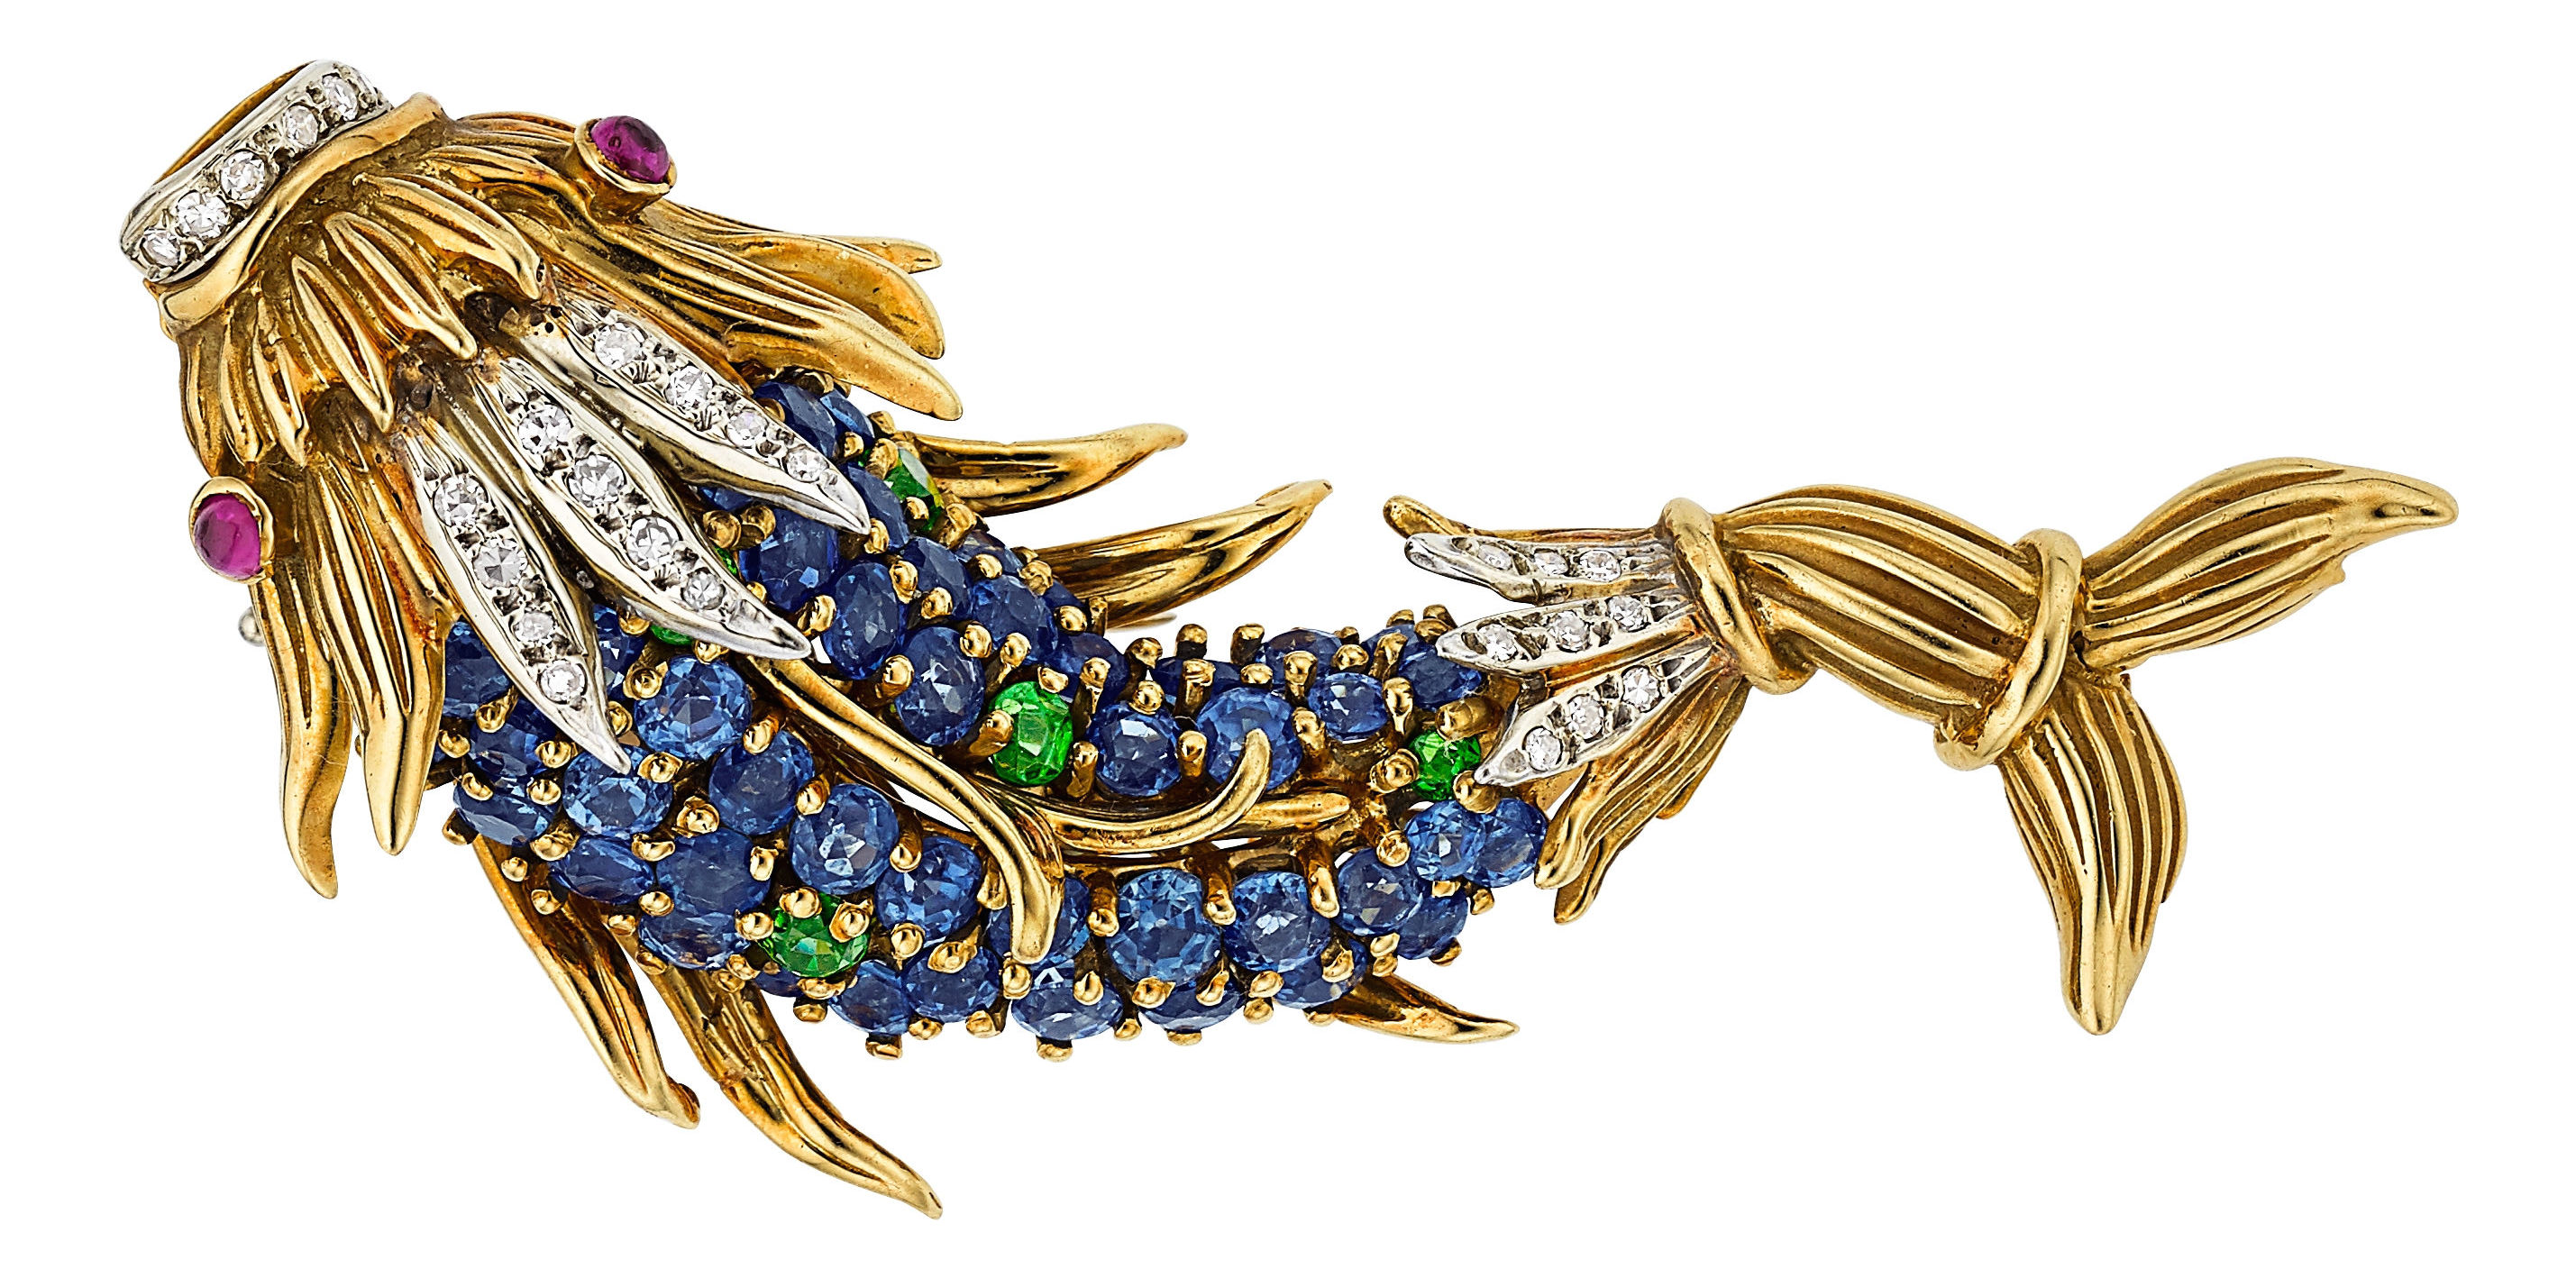 Jean Schlumberger dolphin brooch prize catch in Heritage sale April 19